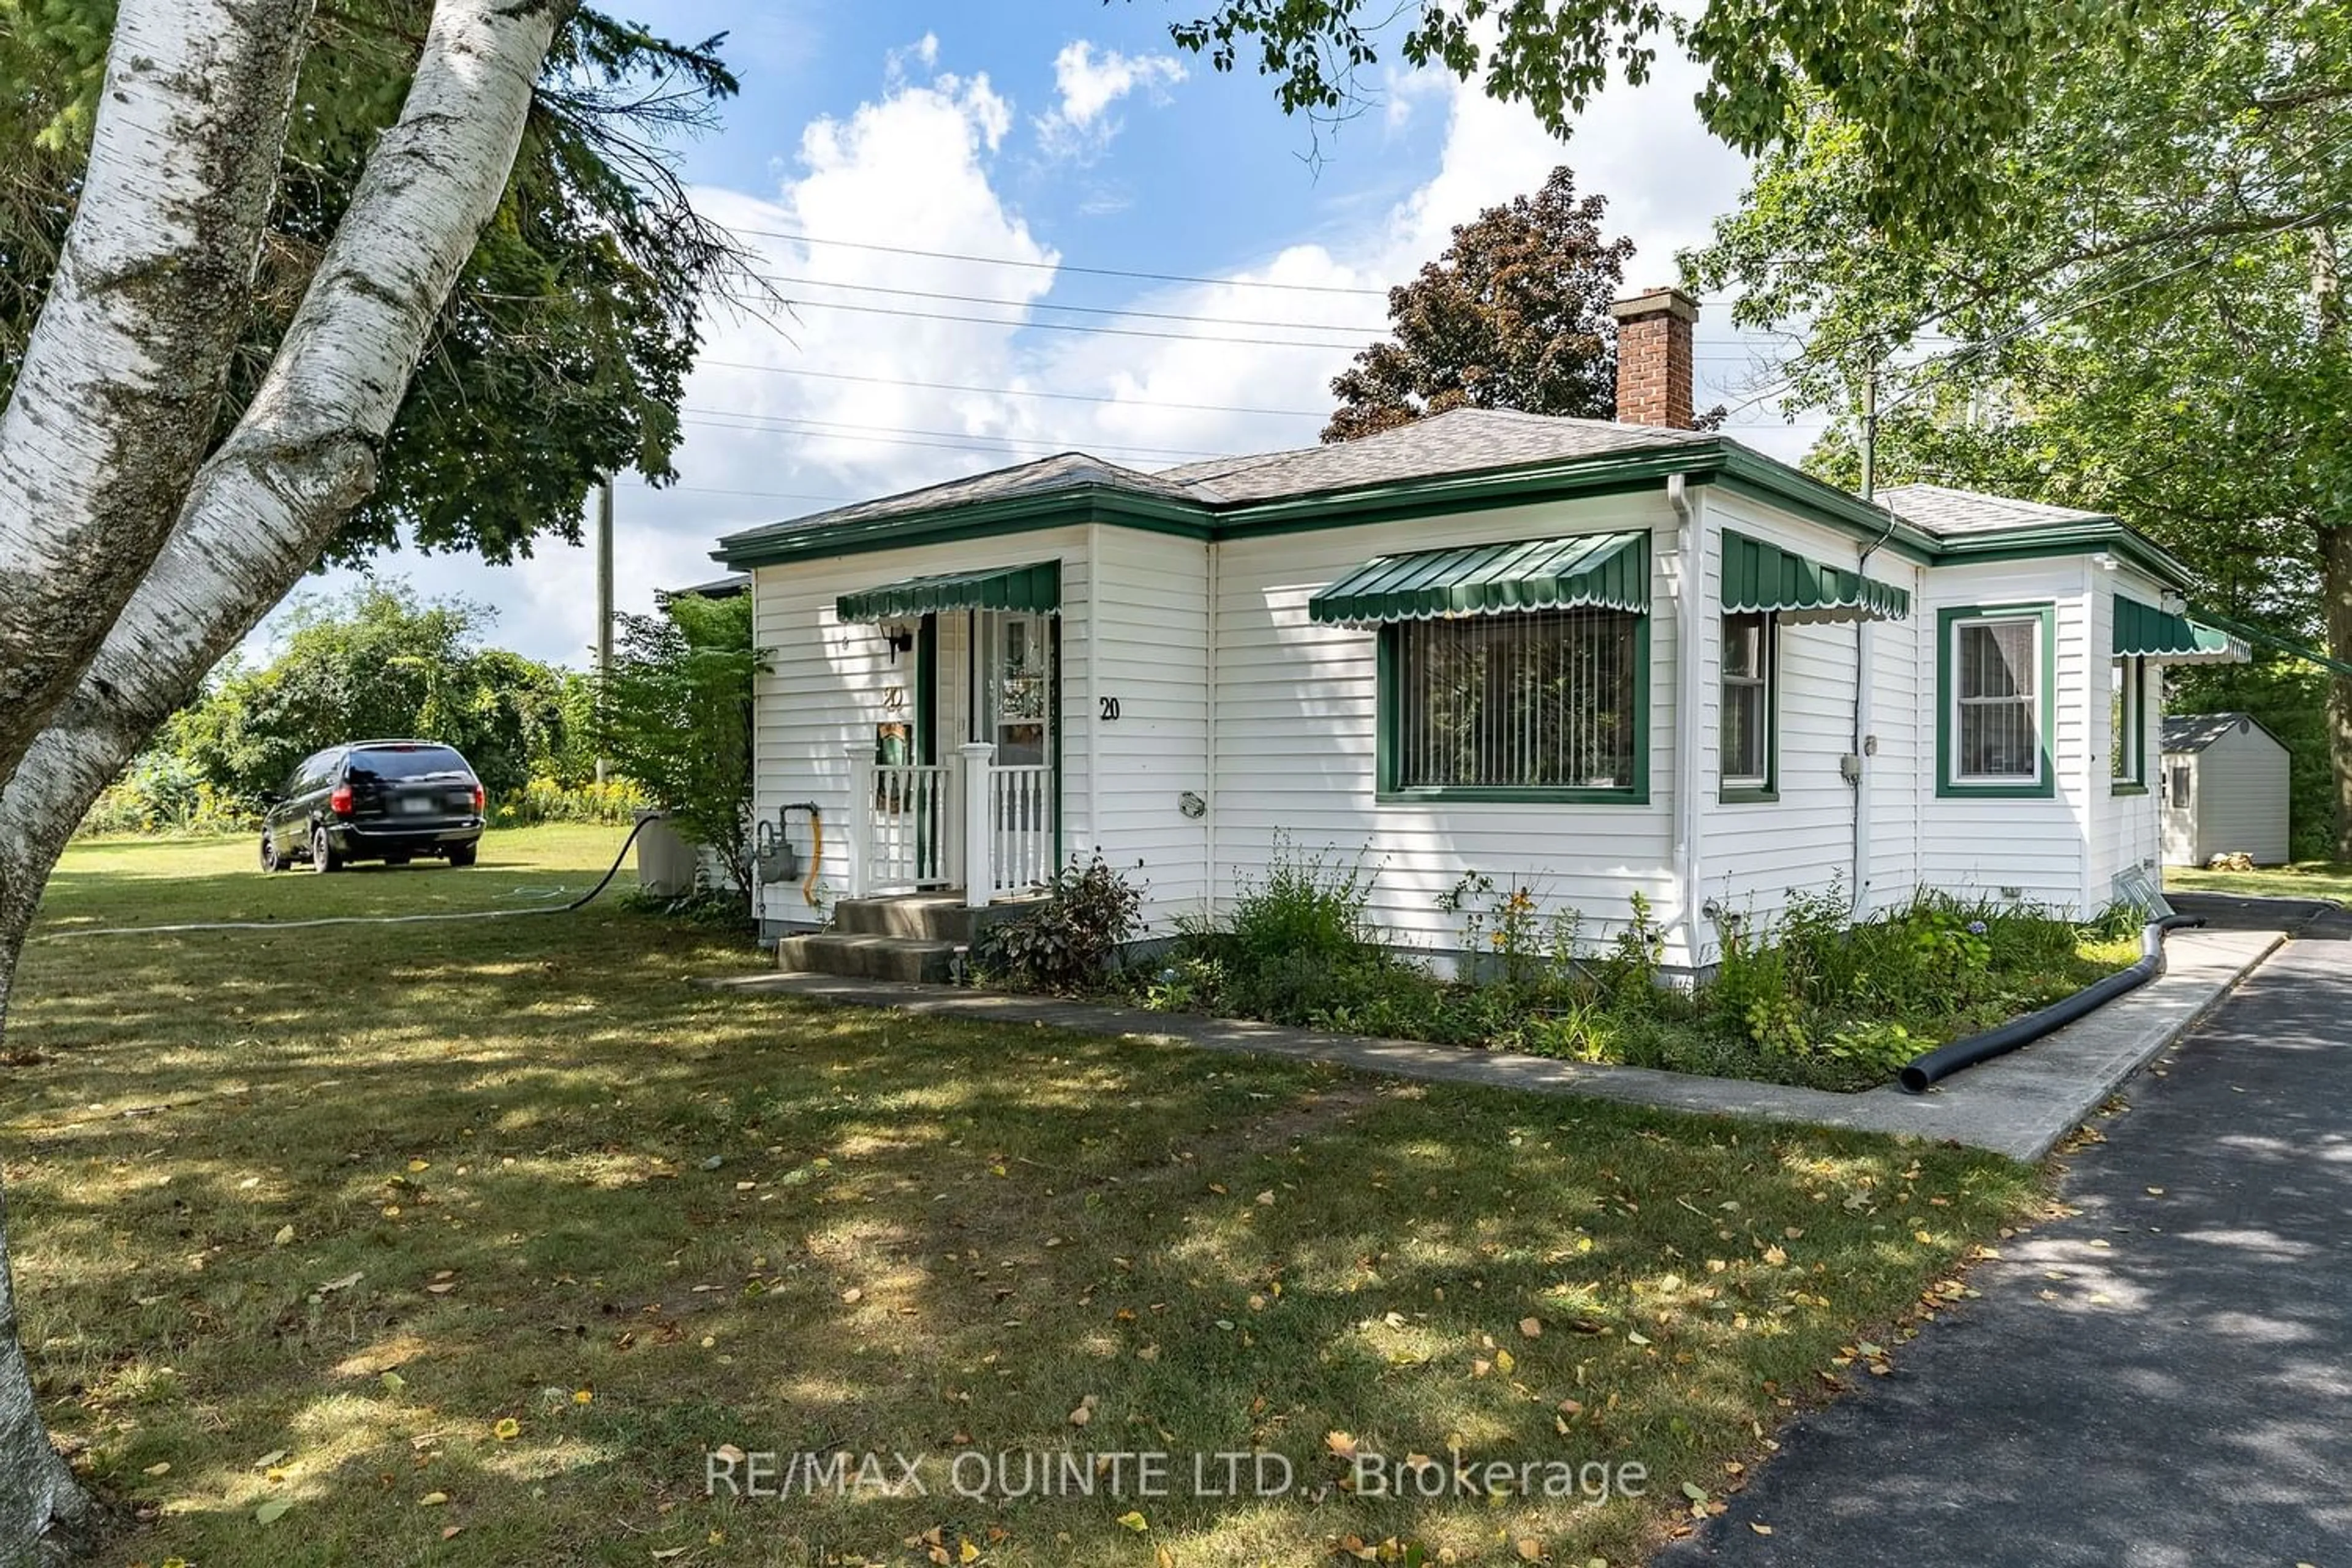 Home with unknown exterior material for 20 Roger St, Prince Edward County Ontario K0K 2T0